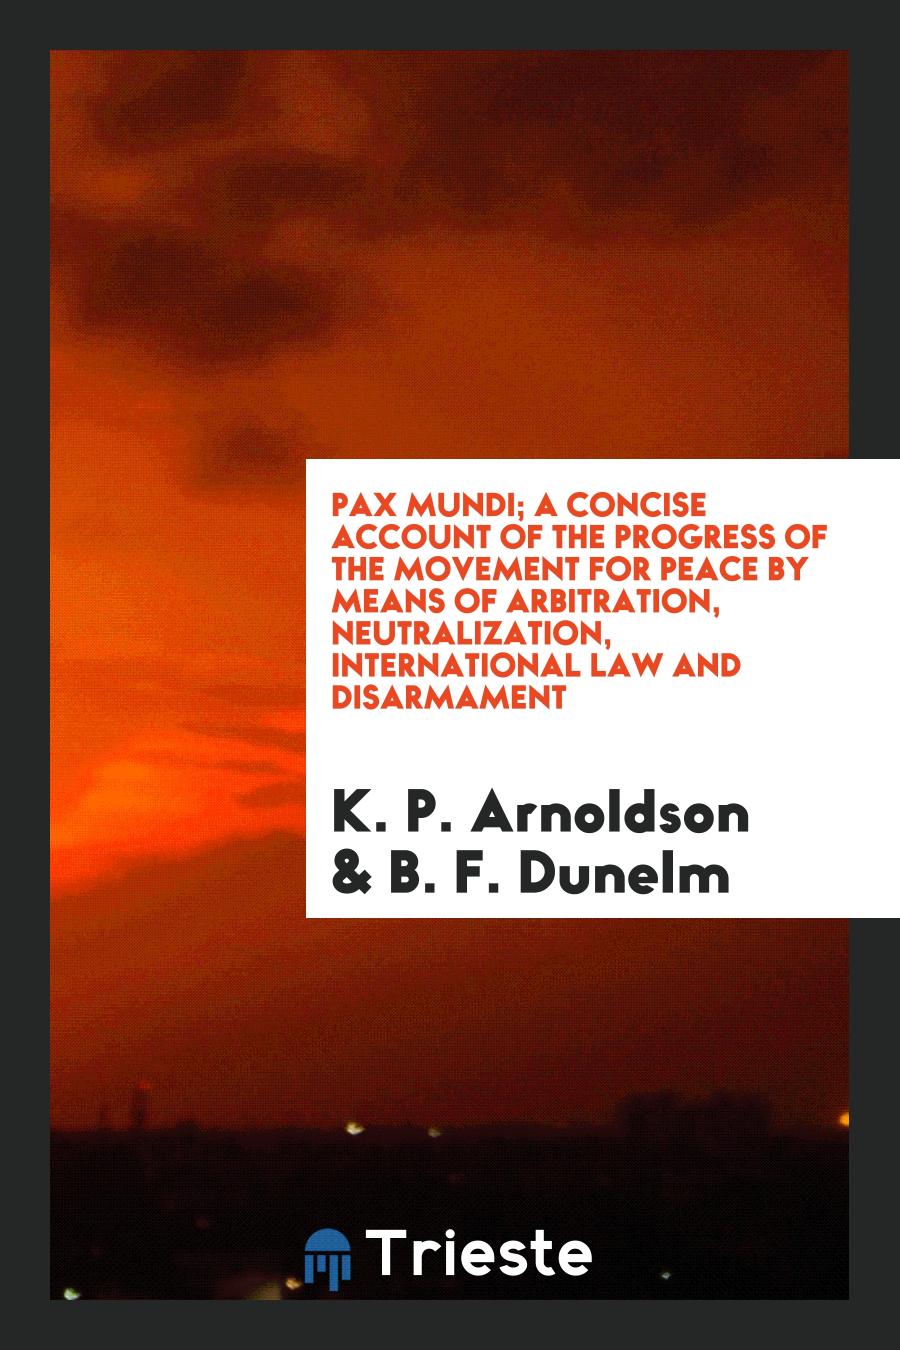 Pax Mundi; A Concise Account of the Progress of the Movement for Peace by Means of Arbitration, Neutralization, International Law and Disarmament